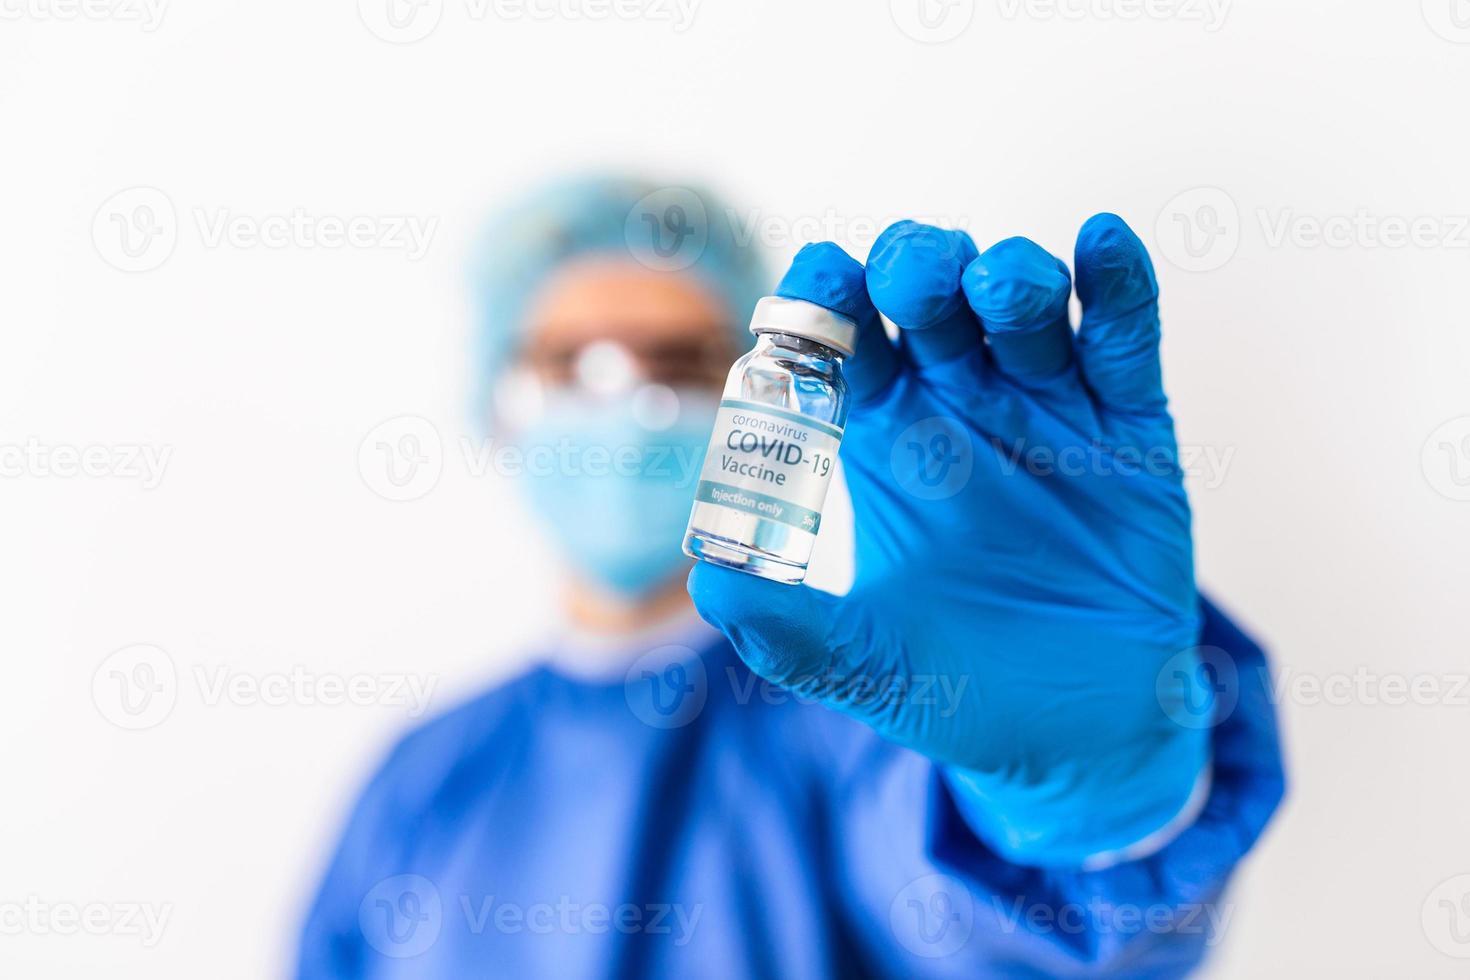 Female doctor holding COVID-19 vaccine. Healthcare And Medical concept.Vaccine vial dose flu shot drug needle syringe,medical concept vaccination hypodermic injection treatment photo